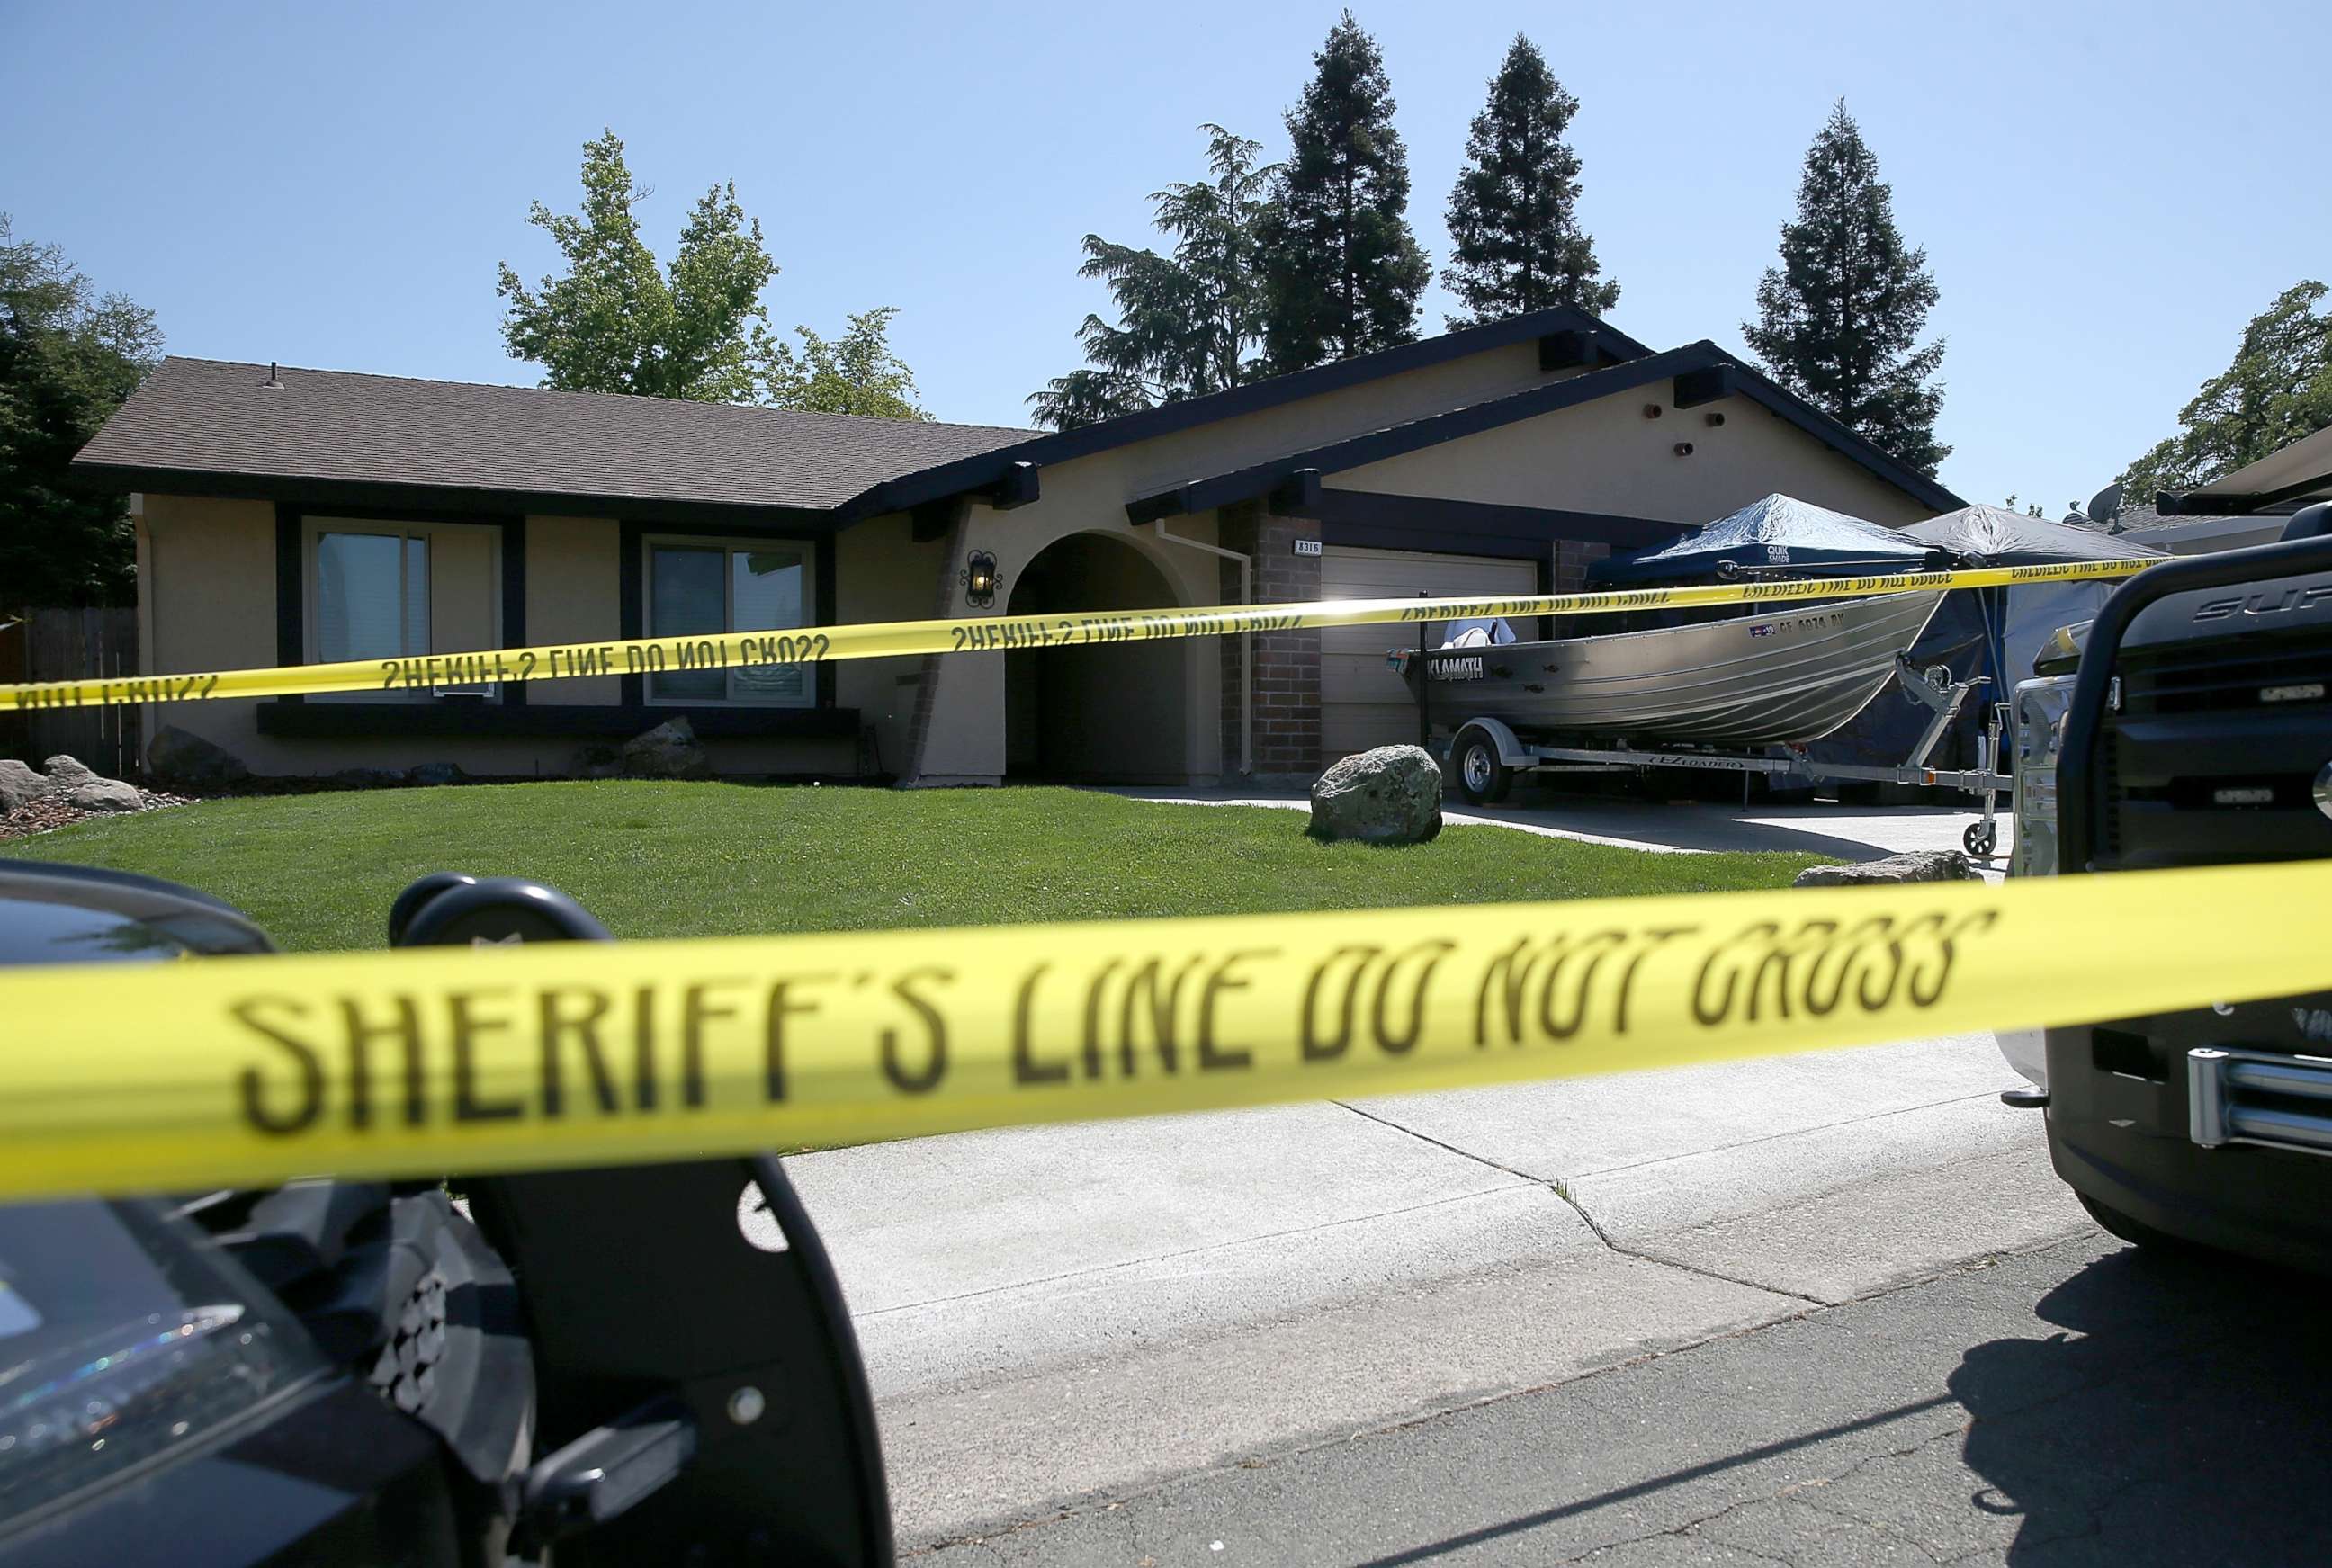 PHOTO: A view of the home of accused rapist and killer Joseph James DeAngelo is pictured on April 24, 2018 in Citrus Heights, Calif.